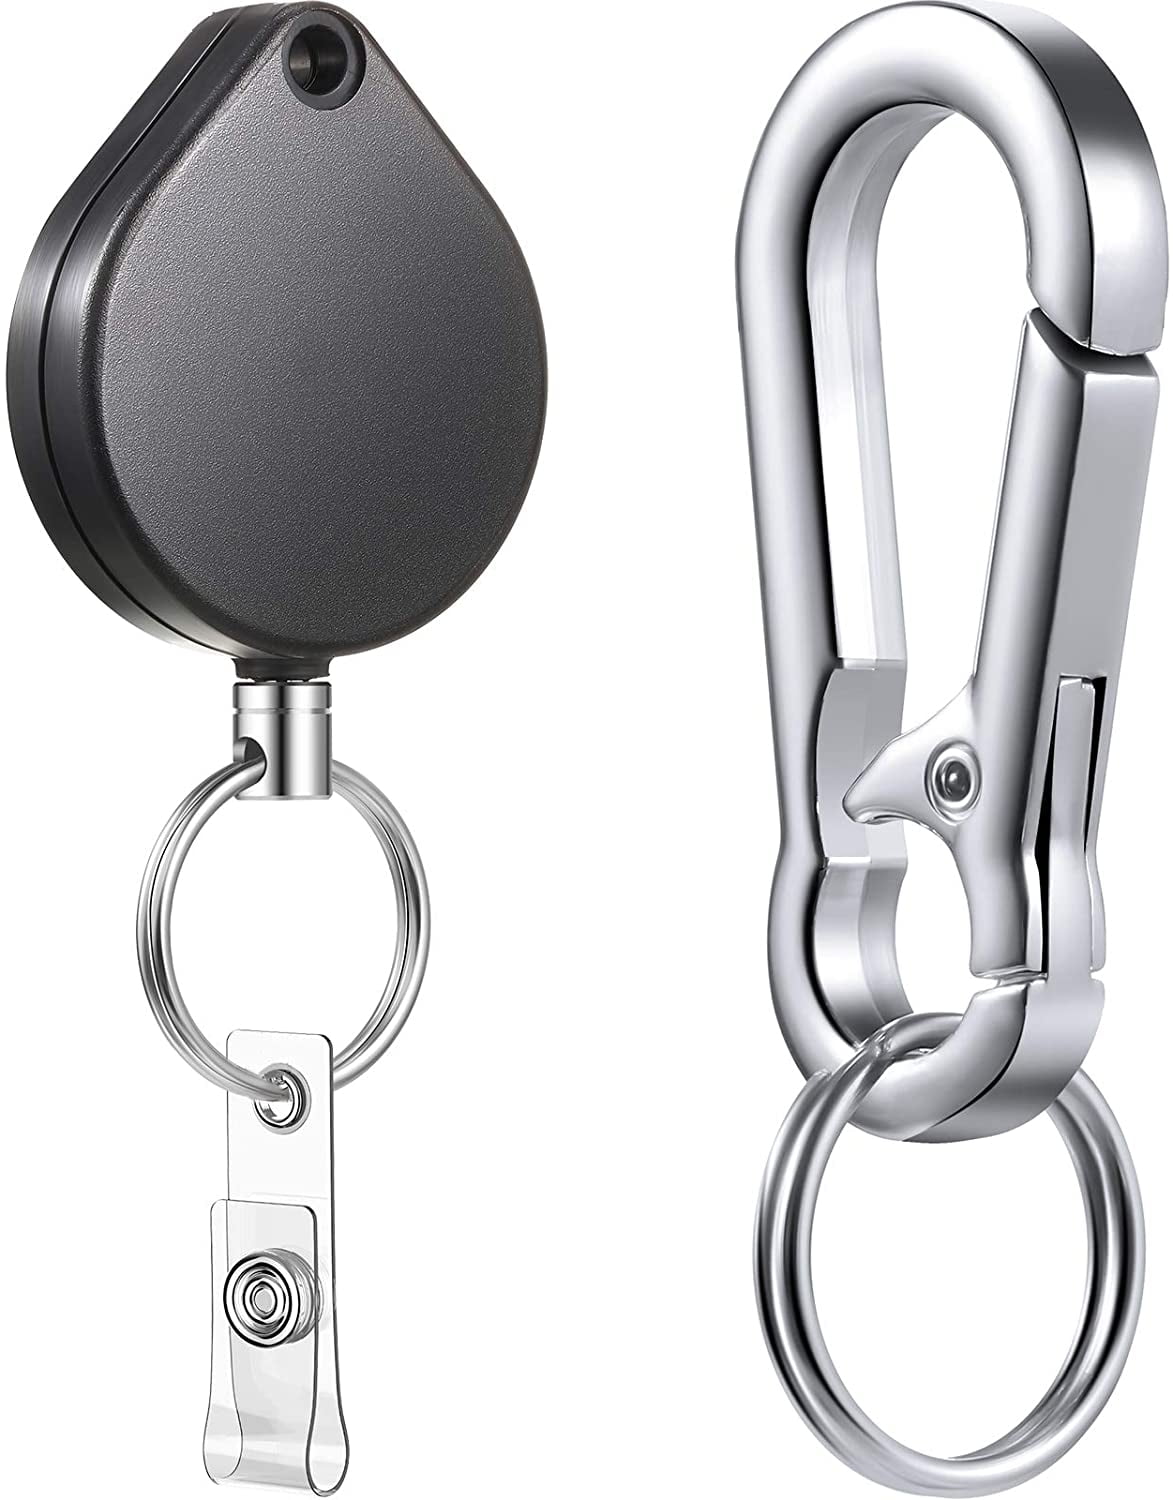 Verizon Smart Locator with Key Ring/Belt Clip For Keys/Luggage and Mor